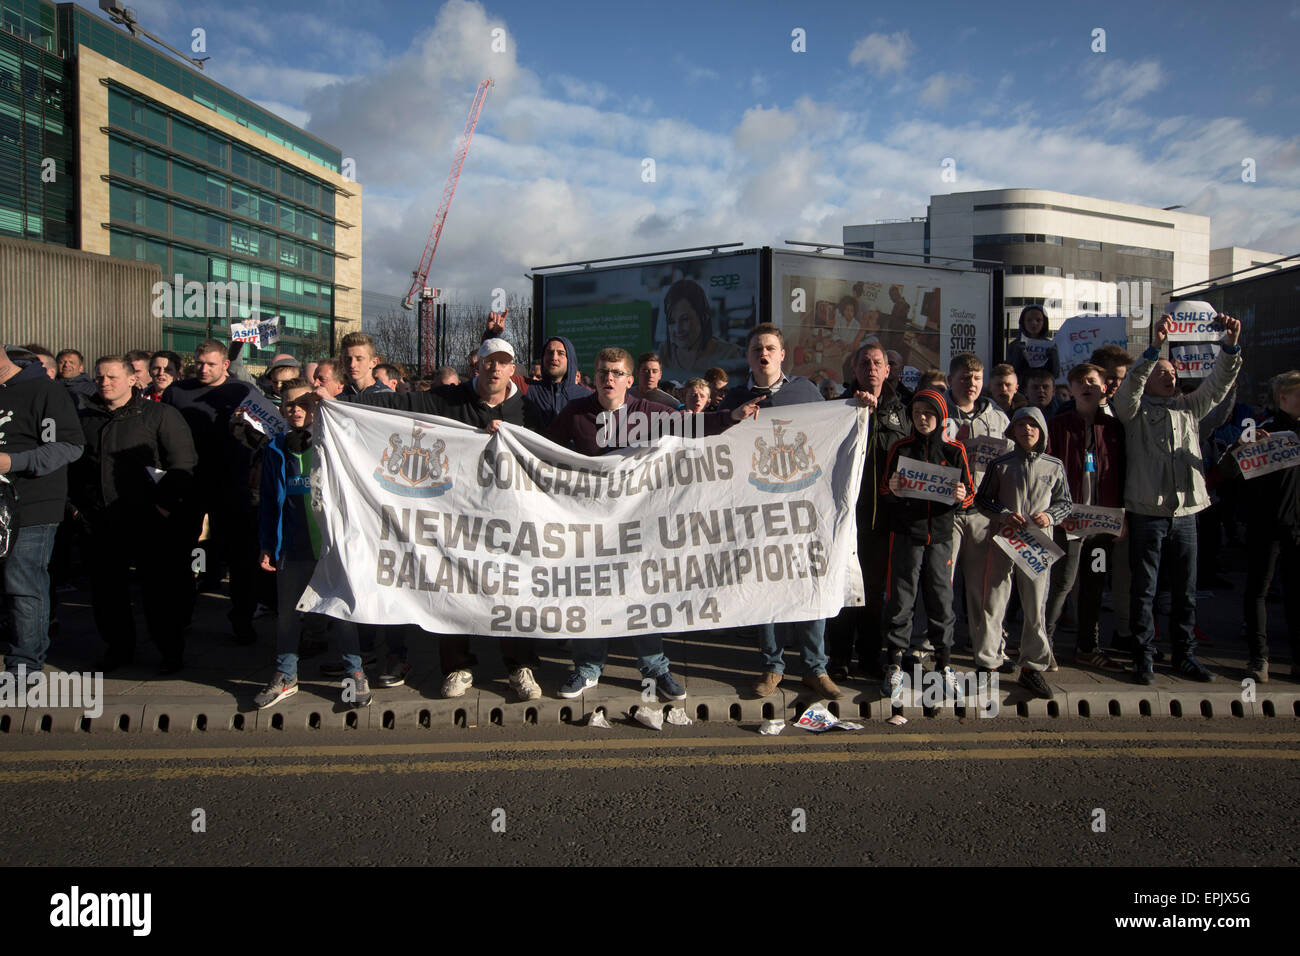 Protesters demonstrating with a banner gathering at the Gallowgate end of the stadium after Newcastle United host Tottenham Hotspurs in an English Premier League match at St. James' Park. The match was boycotted by a section of the home support critical of the role of owner Mike Ashley and sponsorship by a payday loan company. The match was won by Spurs by 3-1, watched by 47,427, the lowest league gate of the season at the stadium. Stock Photo